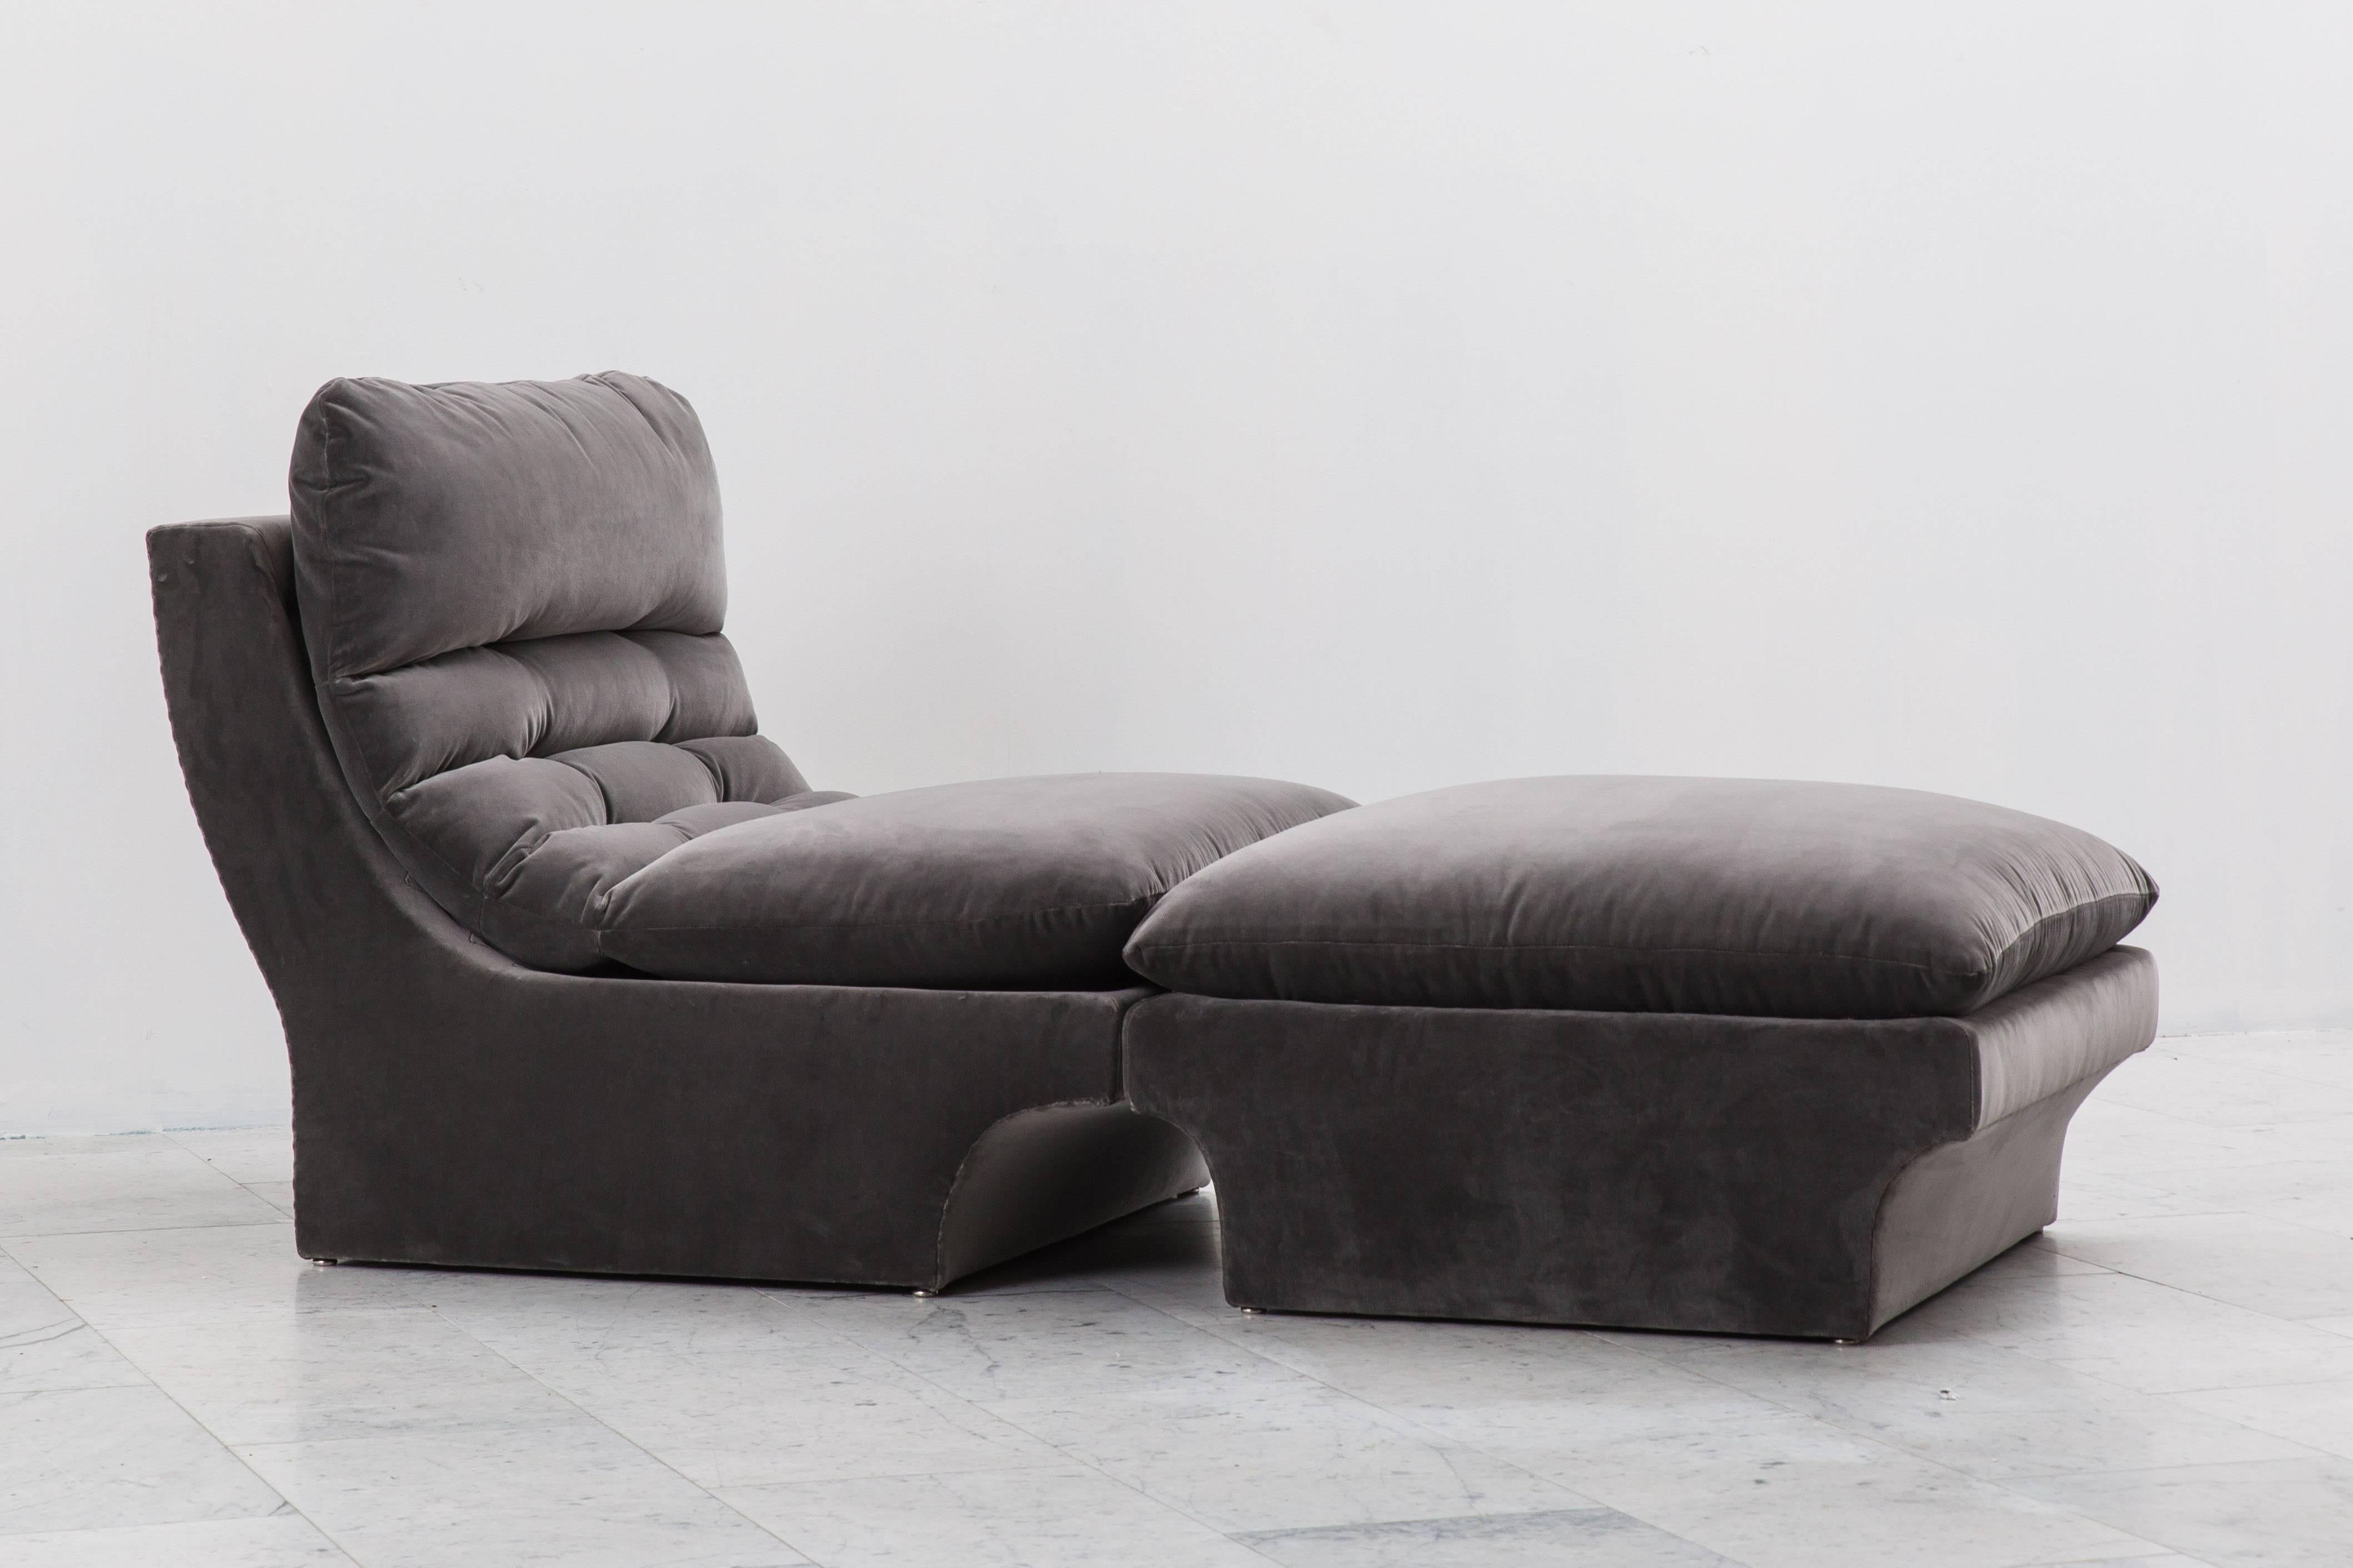 These two-part modular chaise lounges by  for Preview may be arranged separately or as one large module. Positioned to face each other, the chaise lounges become an intimate love-seat perfect for conversation. Featuring rounded curves and luxurious